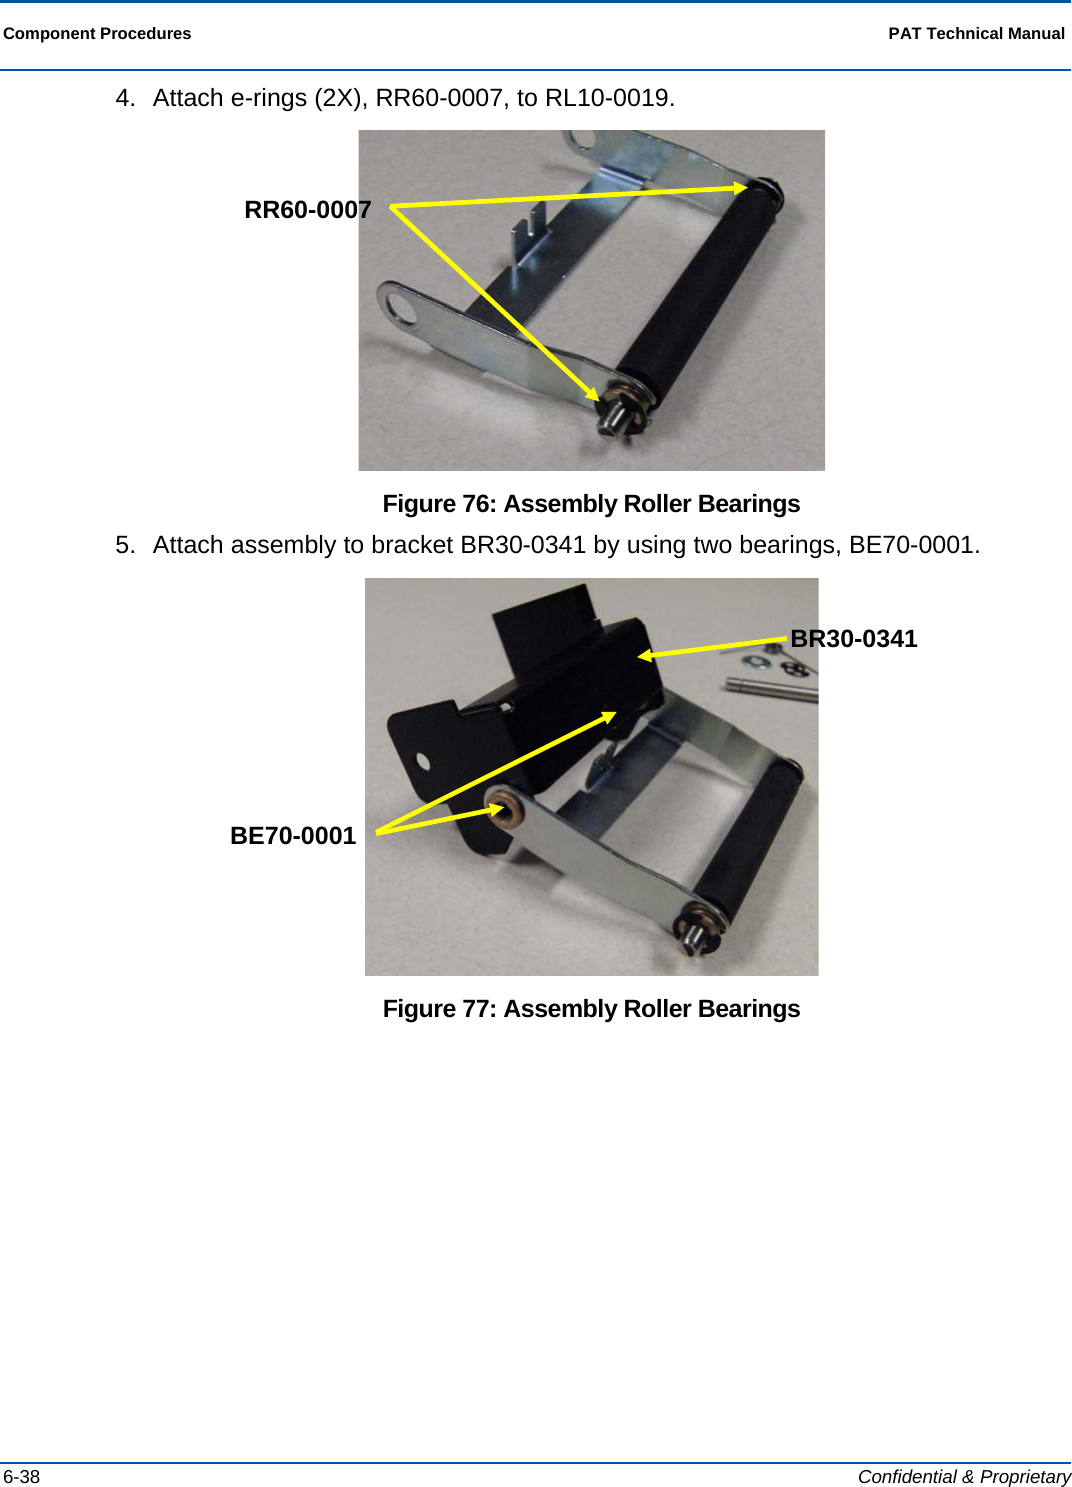  Component Procedures  PAT Technical Manual  6-38  Confidential &amp; Proprietary 4.  Attach e-rings (2X), RR60-0007, to RL10-0019.  Figure 76: Assembly Roller Bearings 5.  Attach assembly to bracket BR30-0341 by using two bearings, BE70-0001.  Figure 77: Assembly Roller Bearings RR60-0007 BE70-0001 BR30-0341 